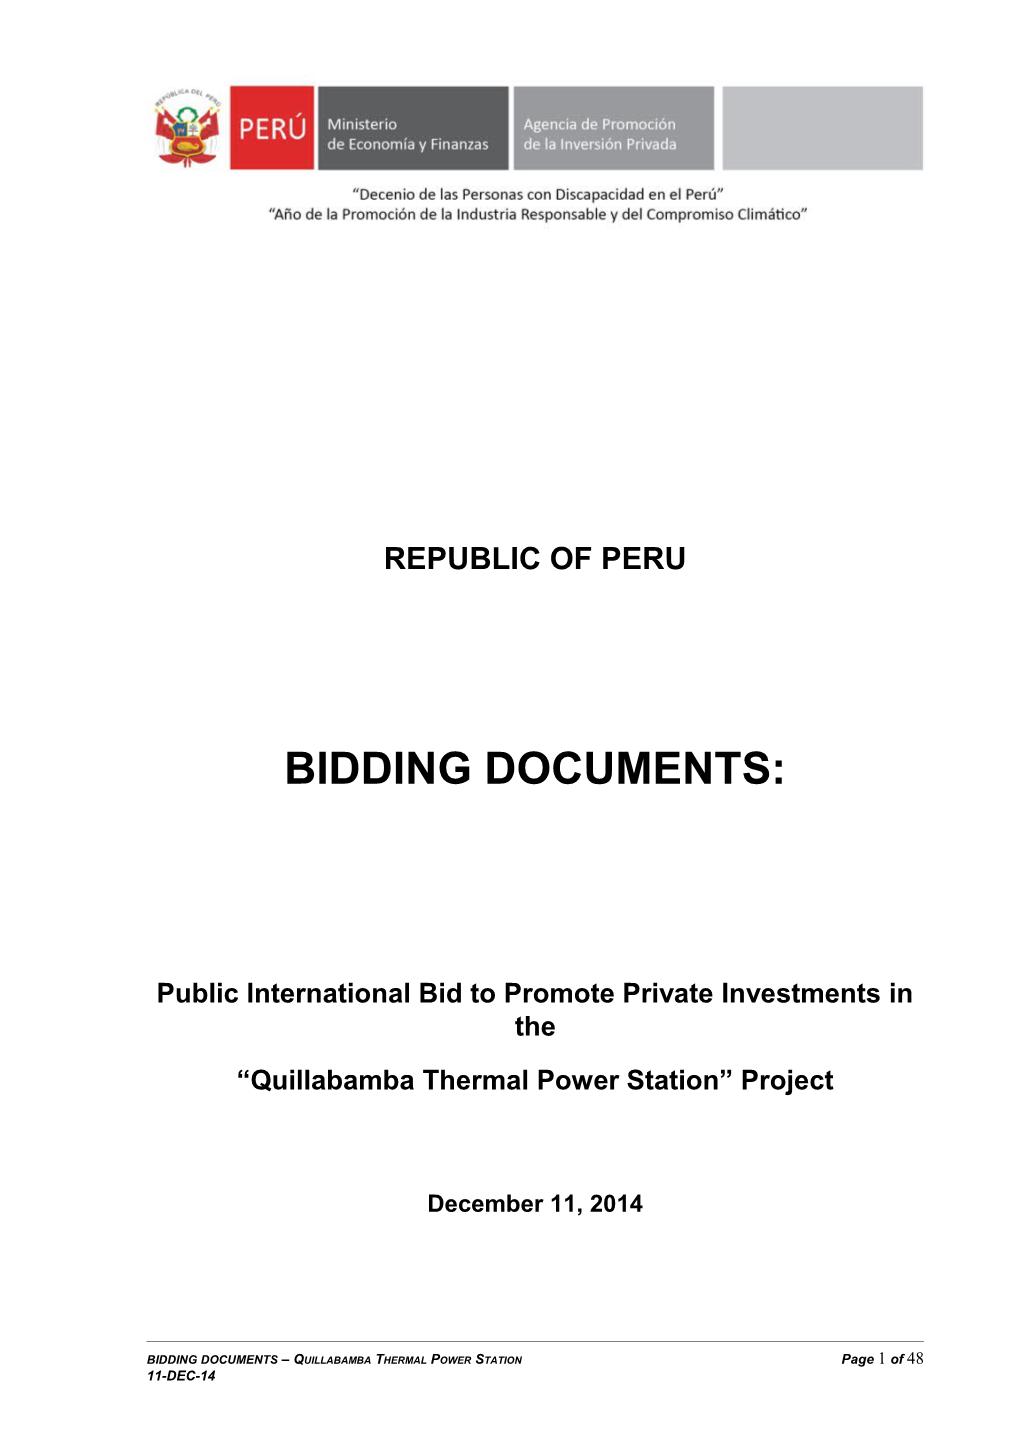 Public International Bid to Promote Private Investments in The